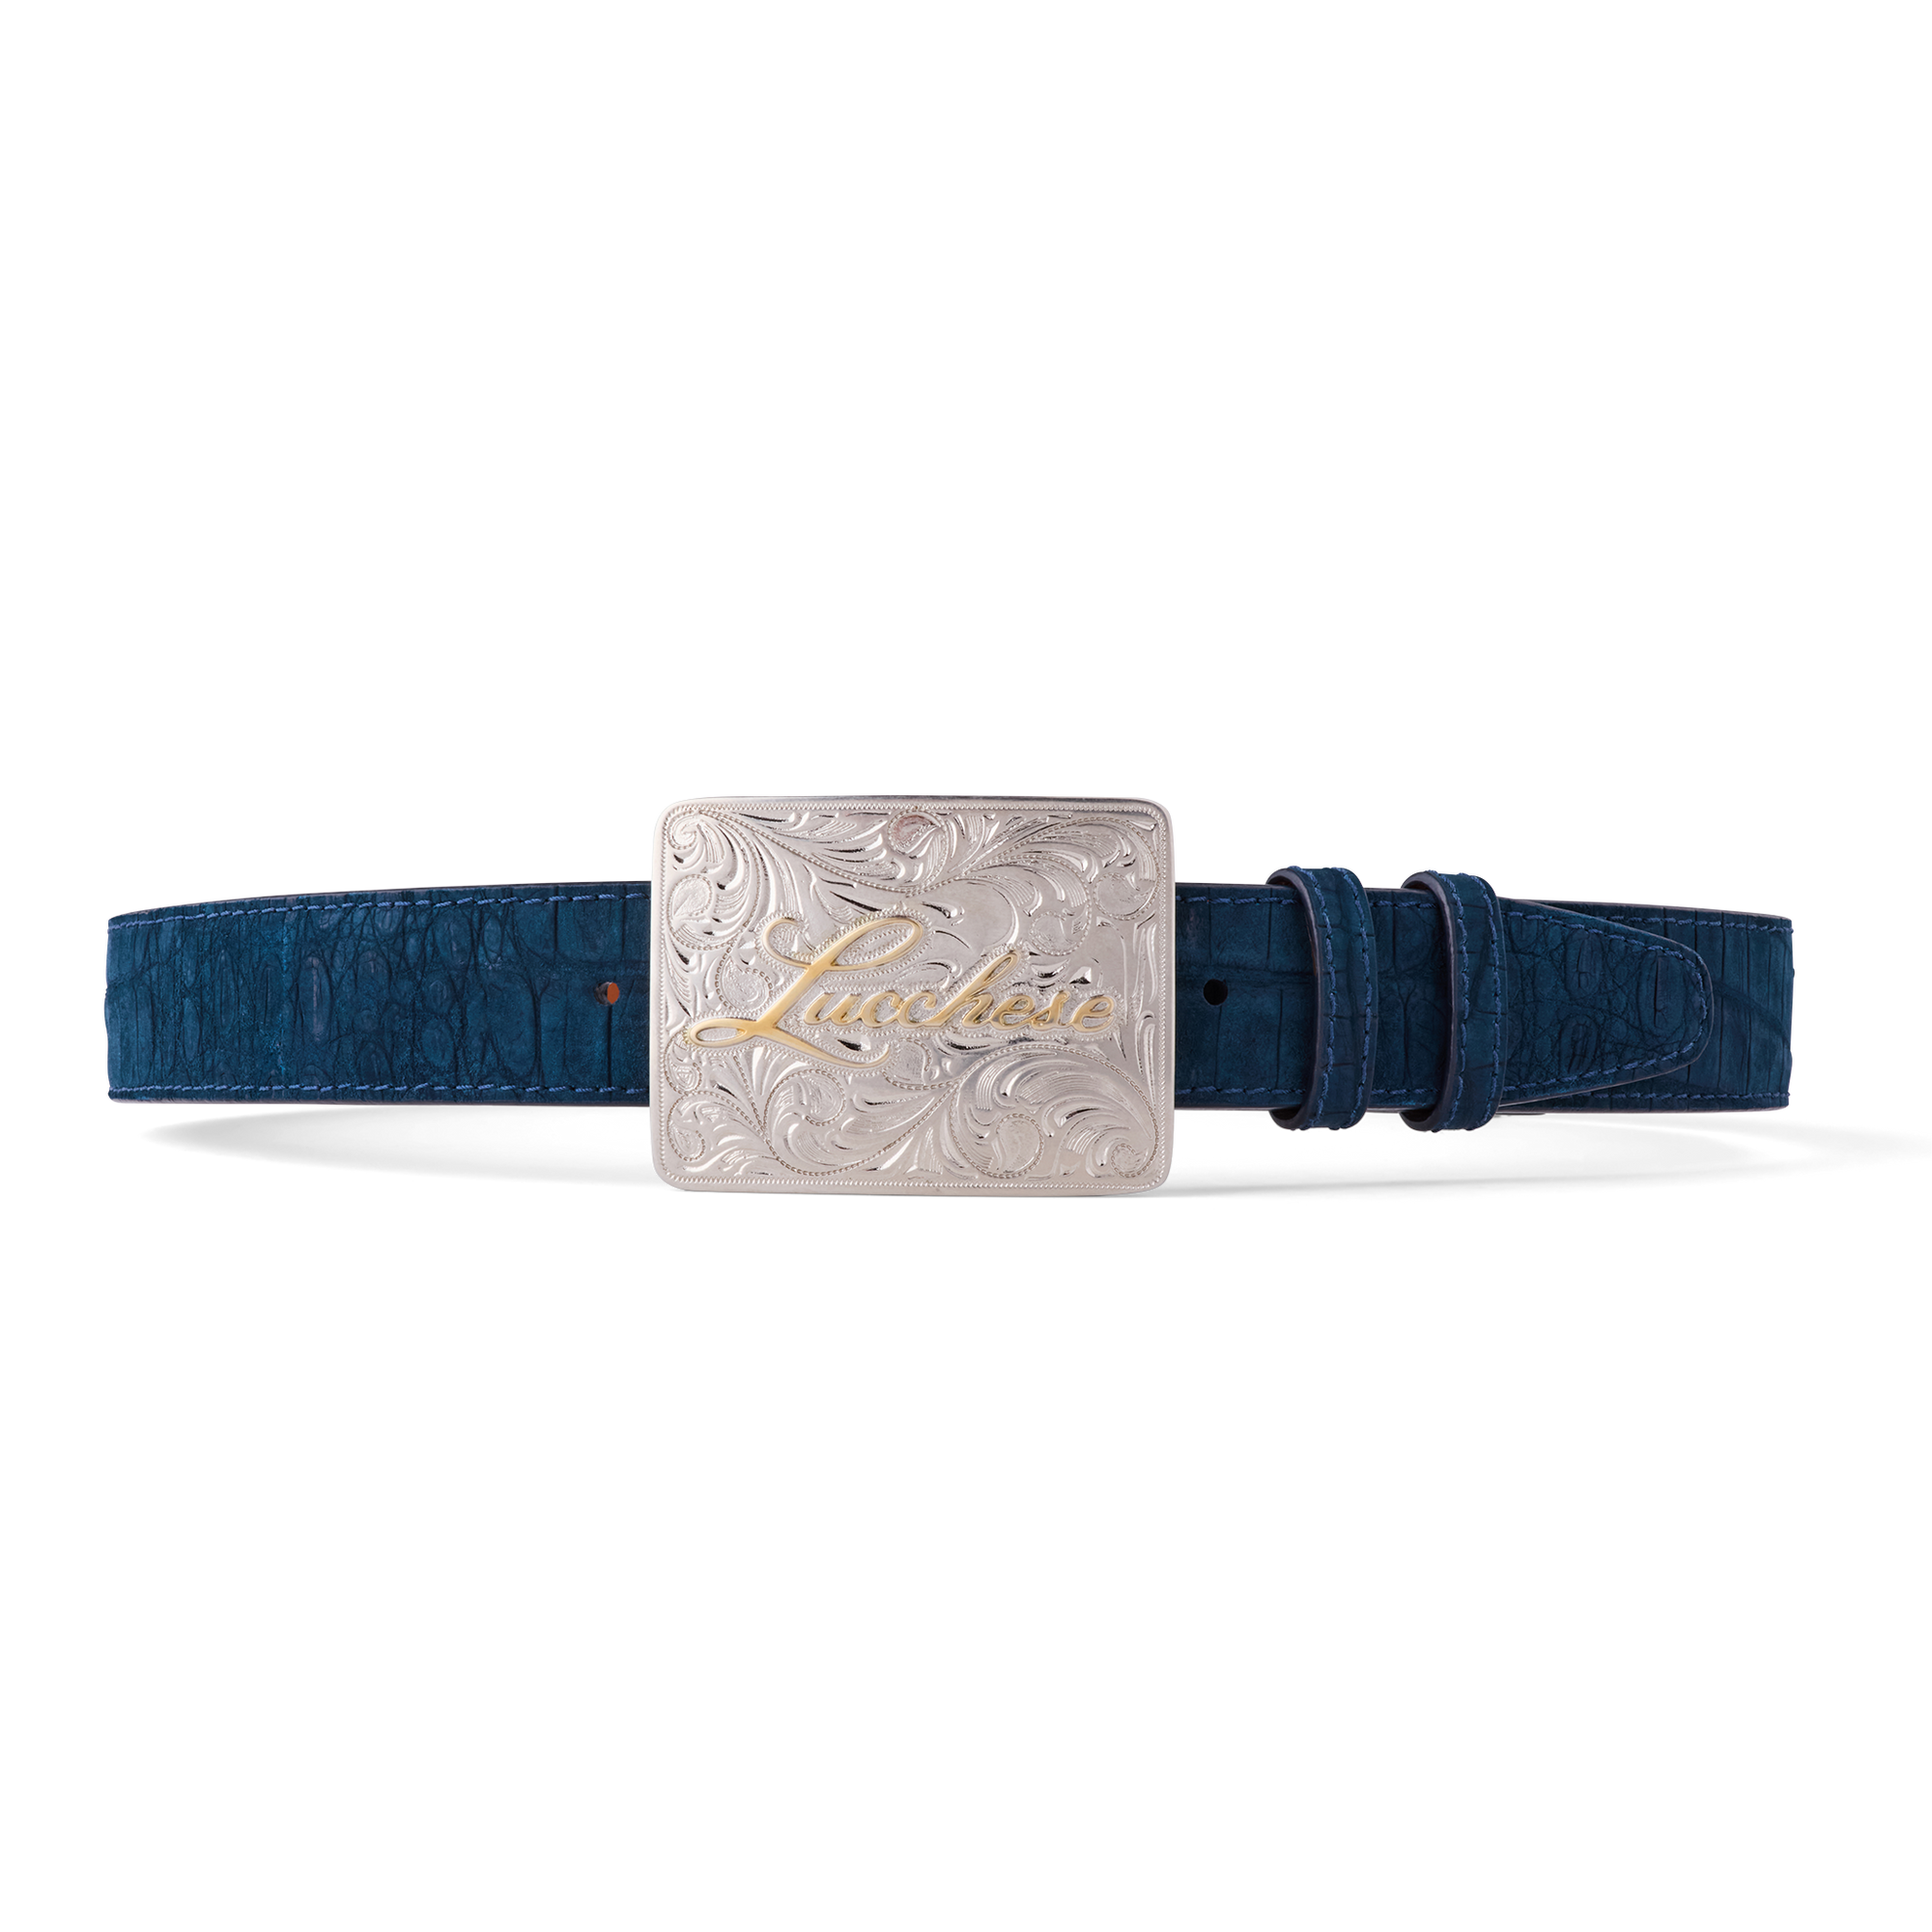 Sueded Caiman Memento Belt - Lucchese